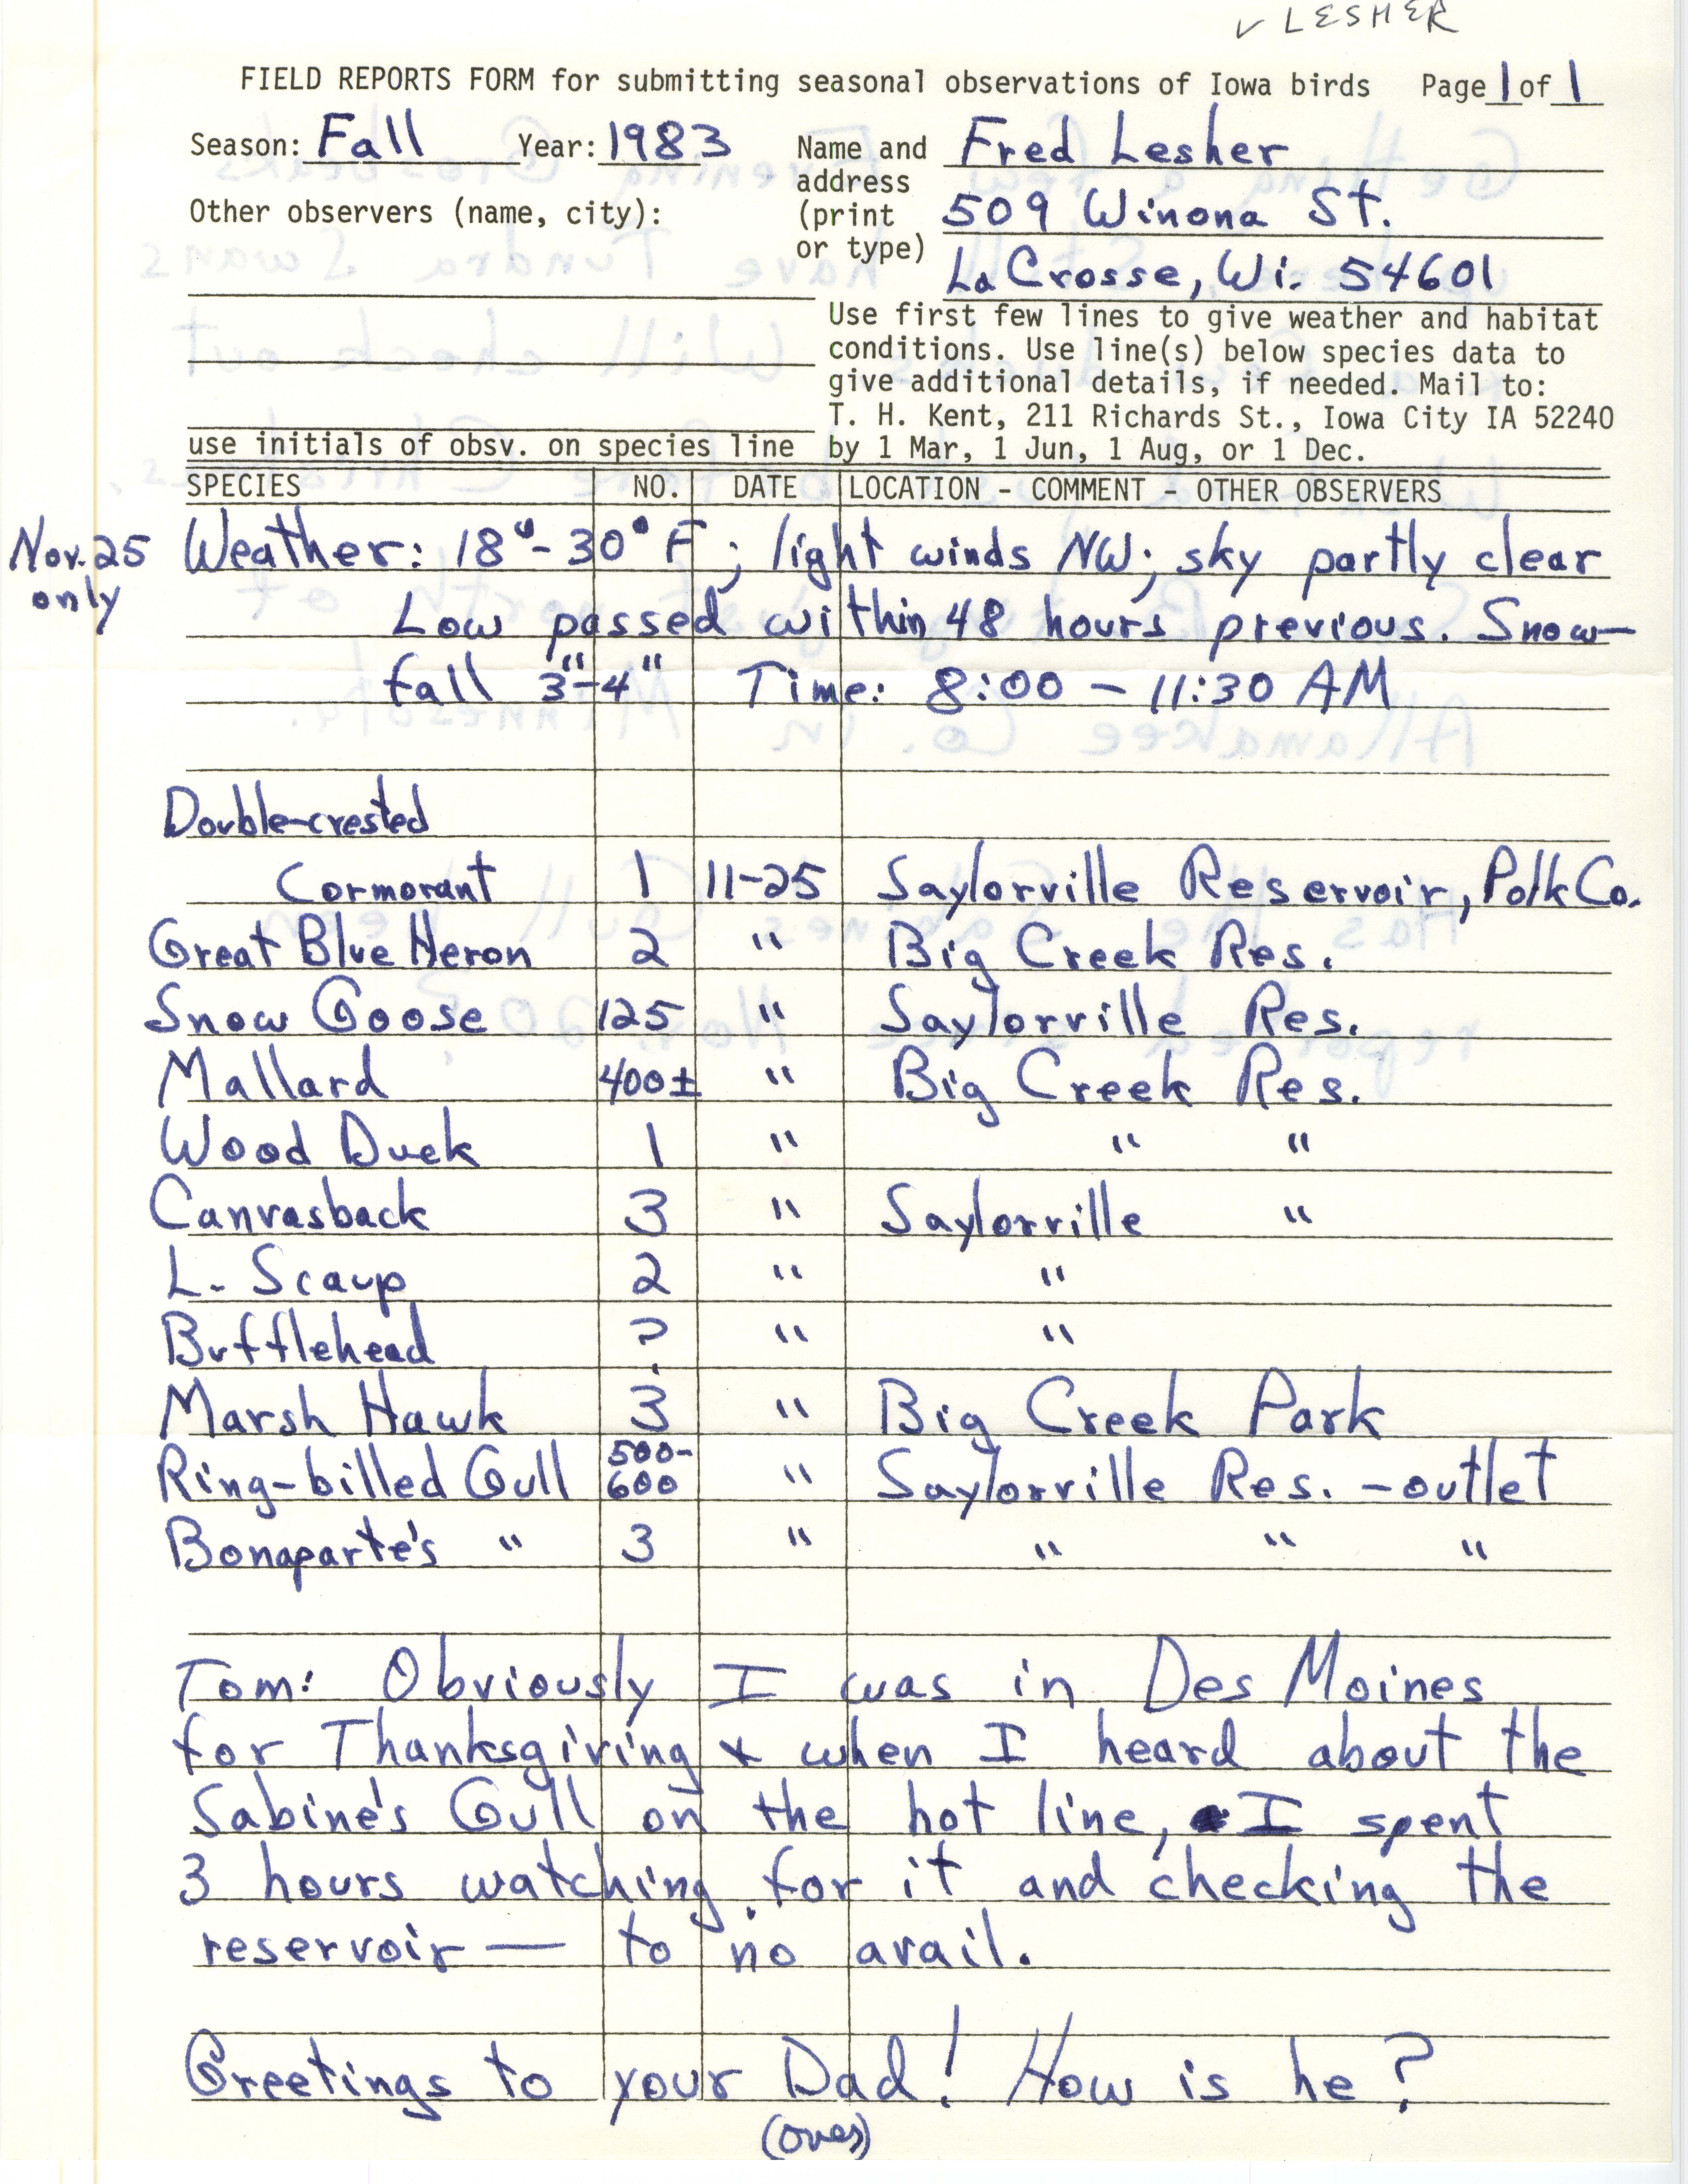 Field reports form for submitting seasonal observations of Iowa birds, Fred Lesher, fall 1983